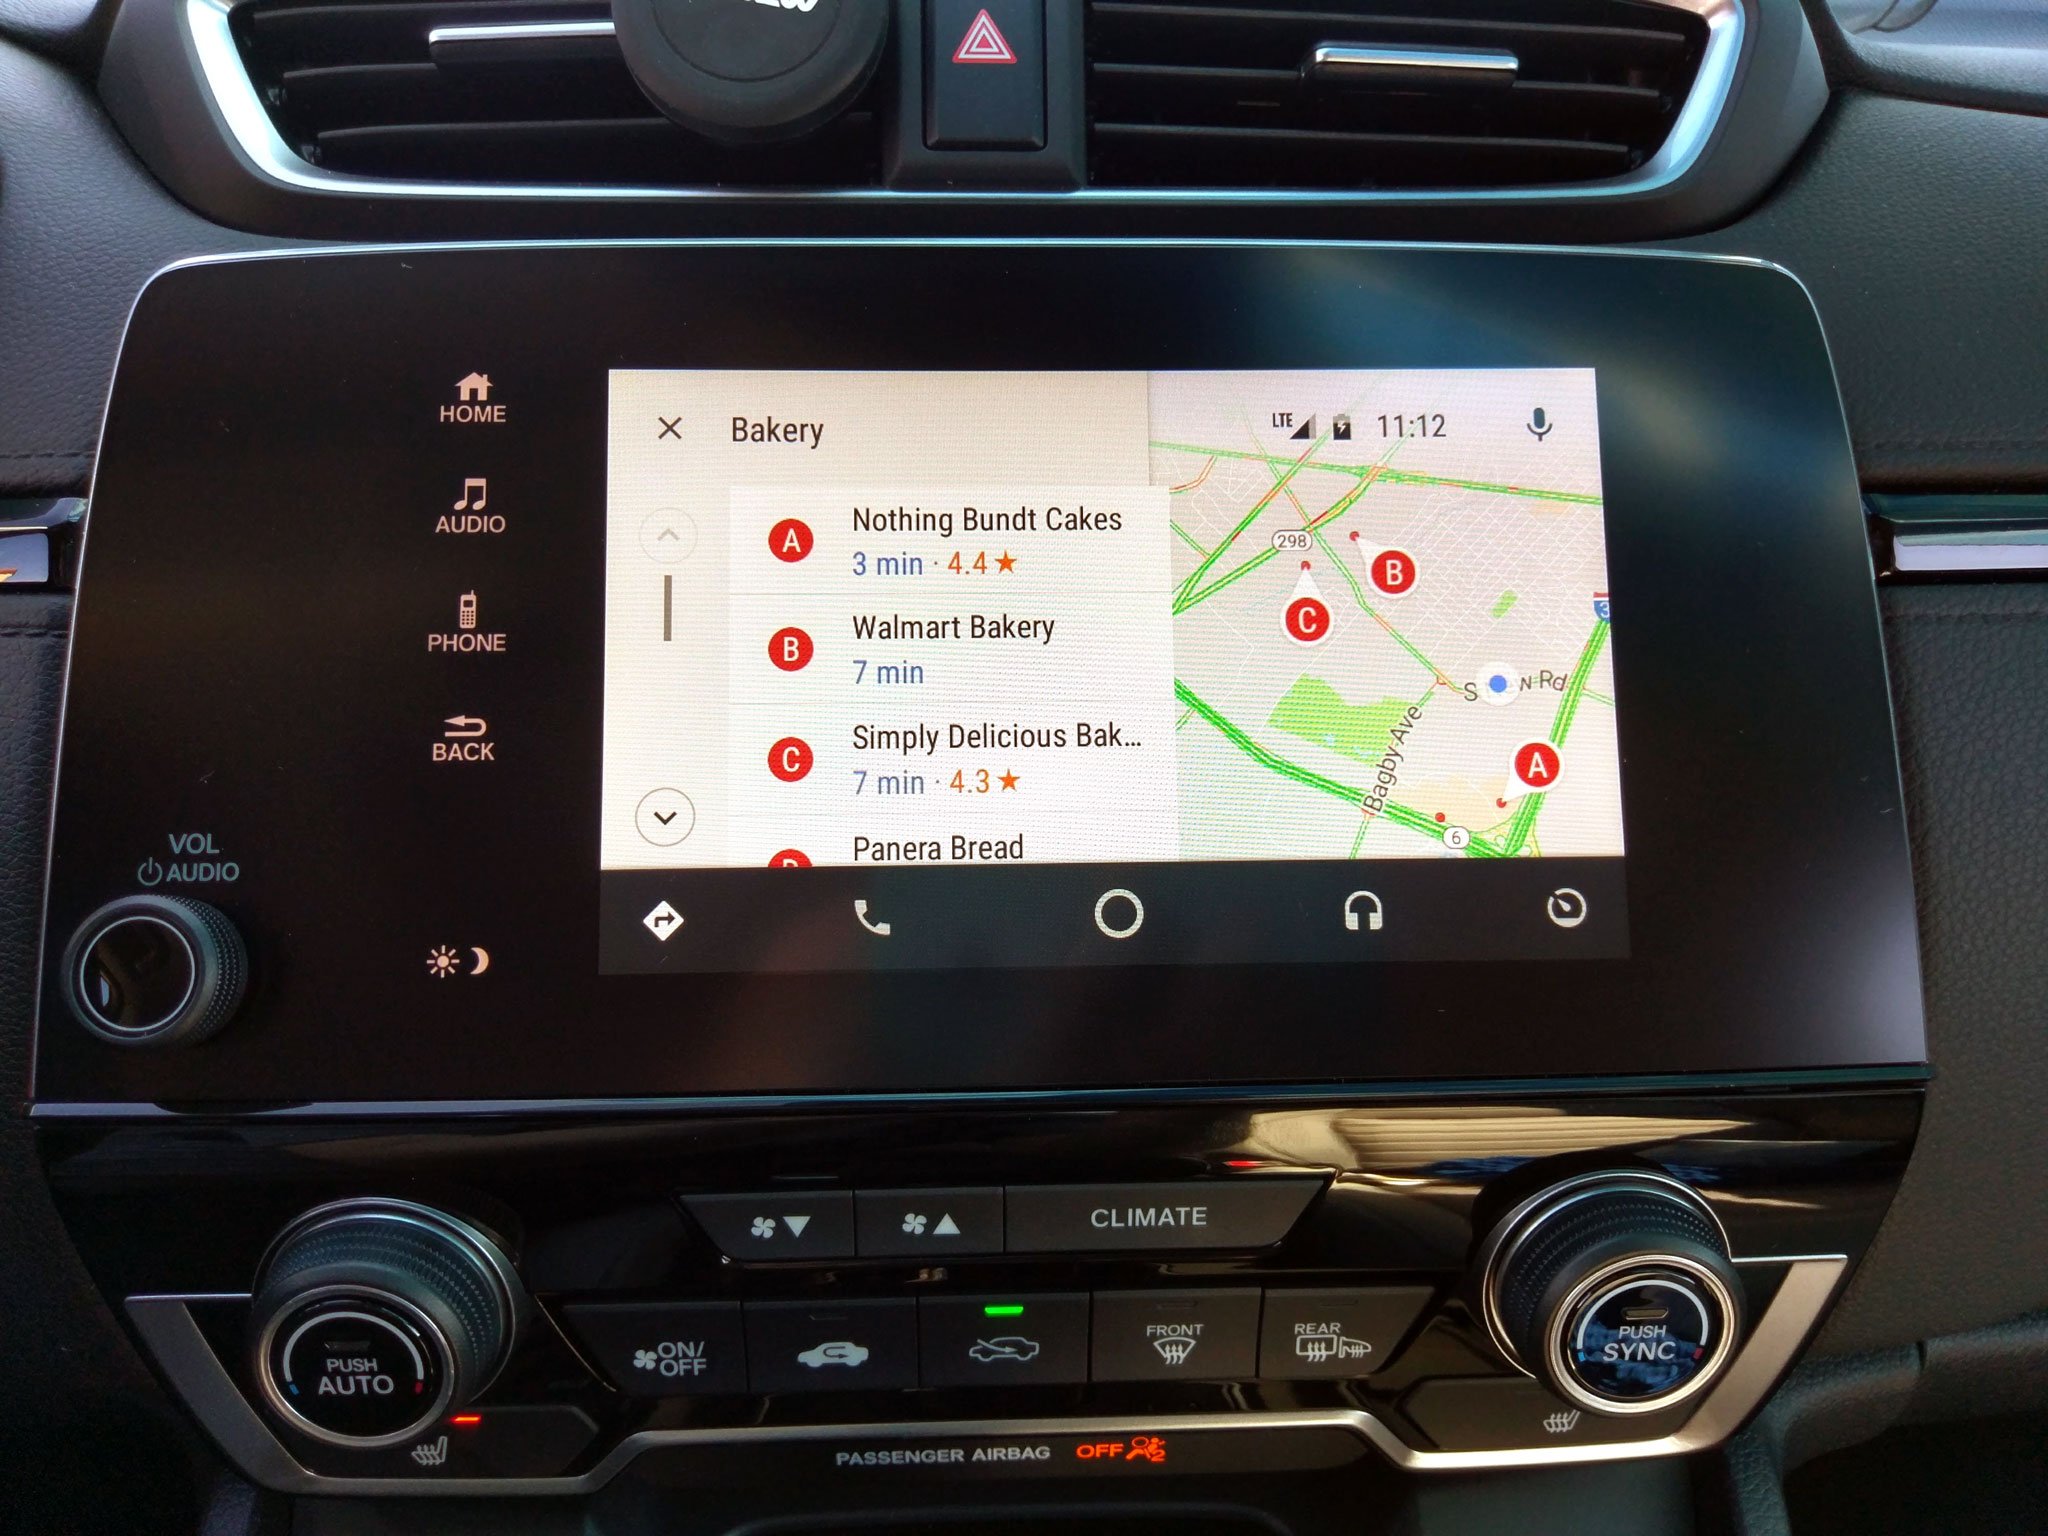 crv android auto maps search bakery